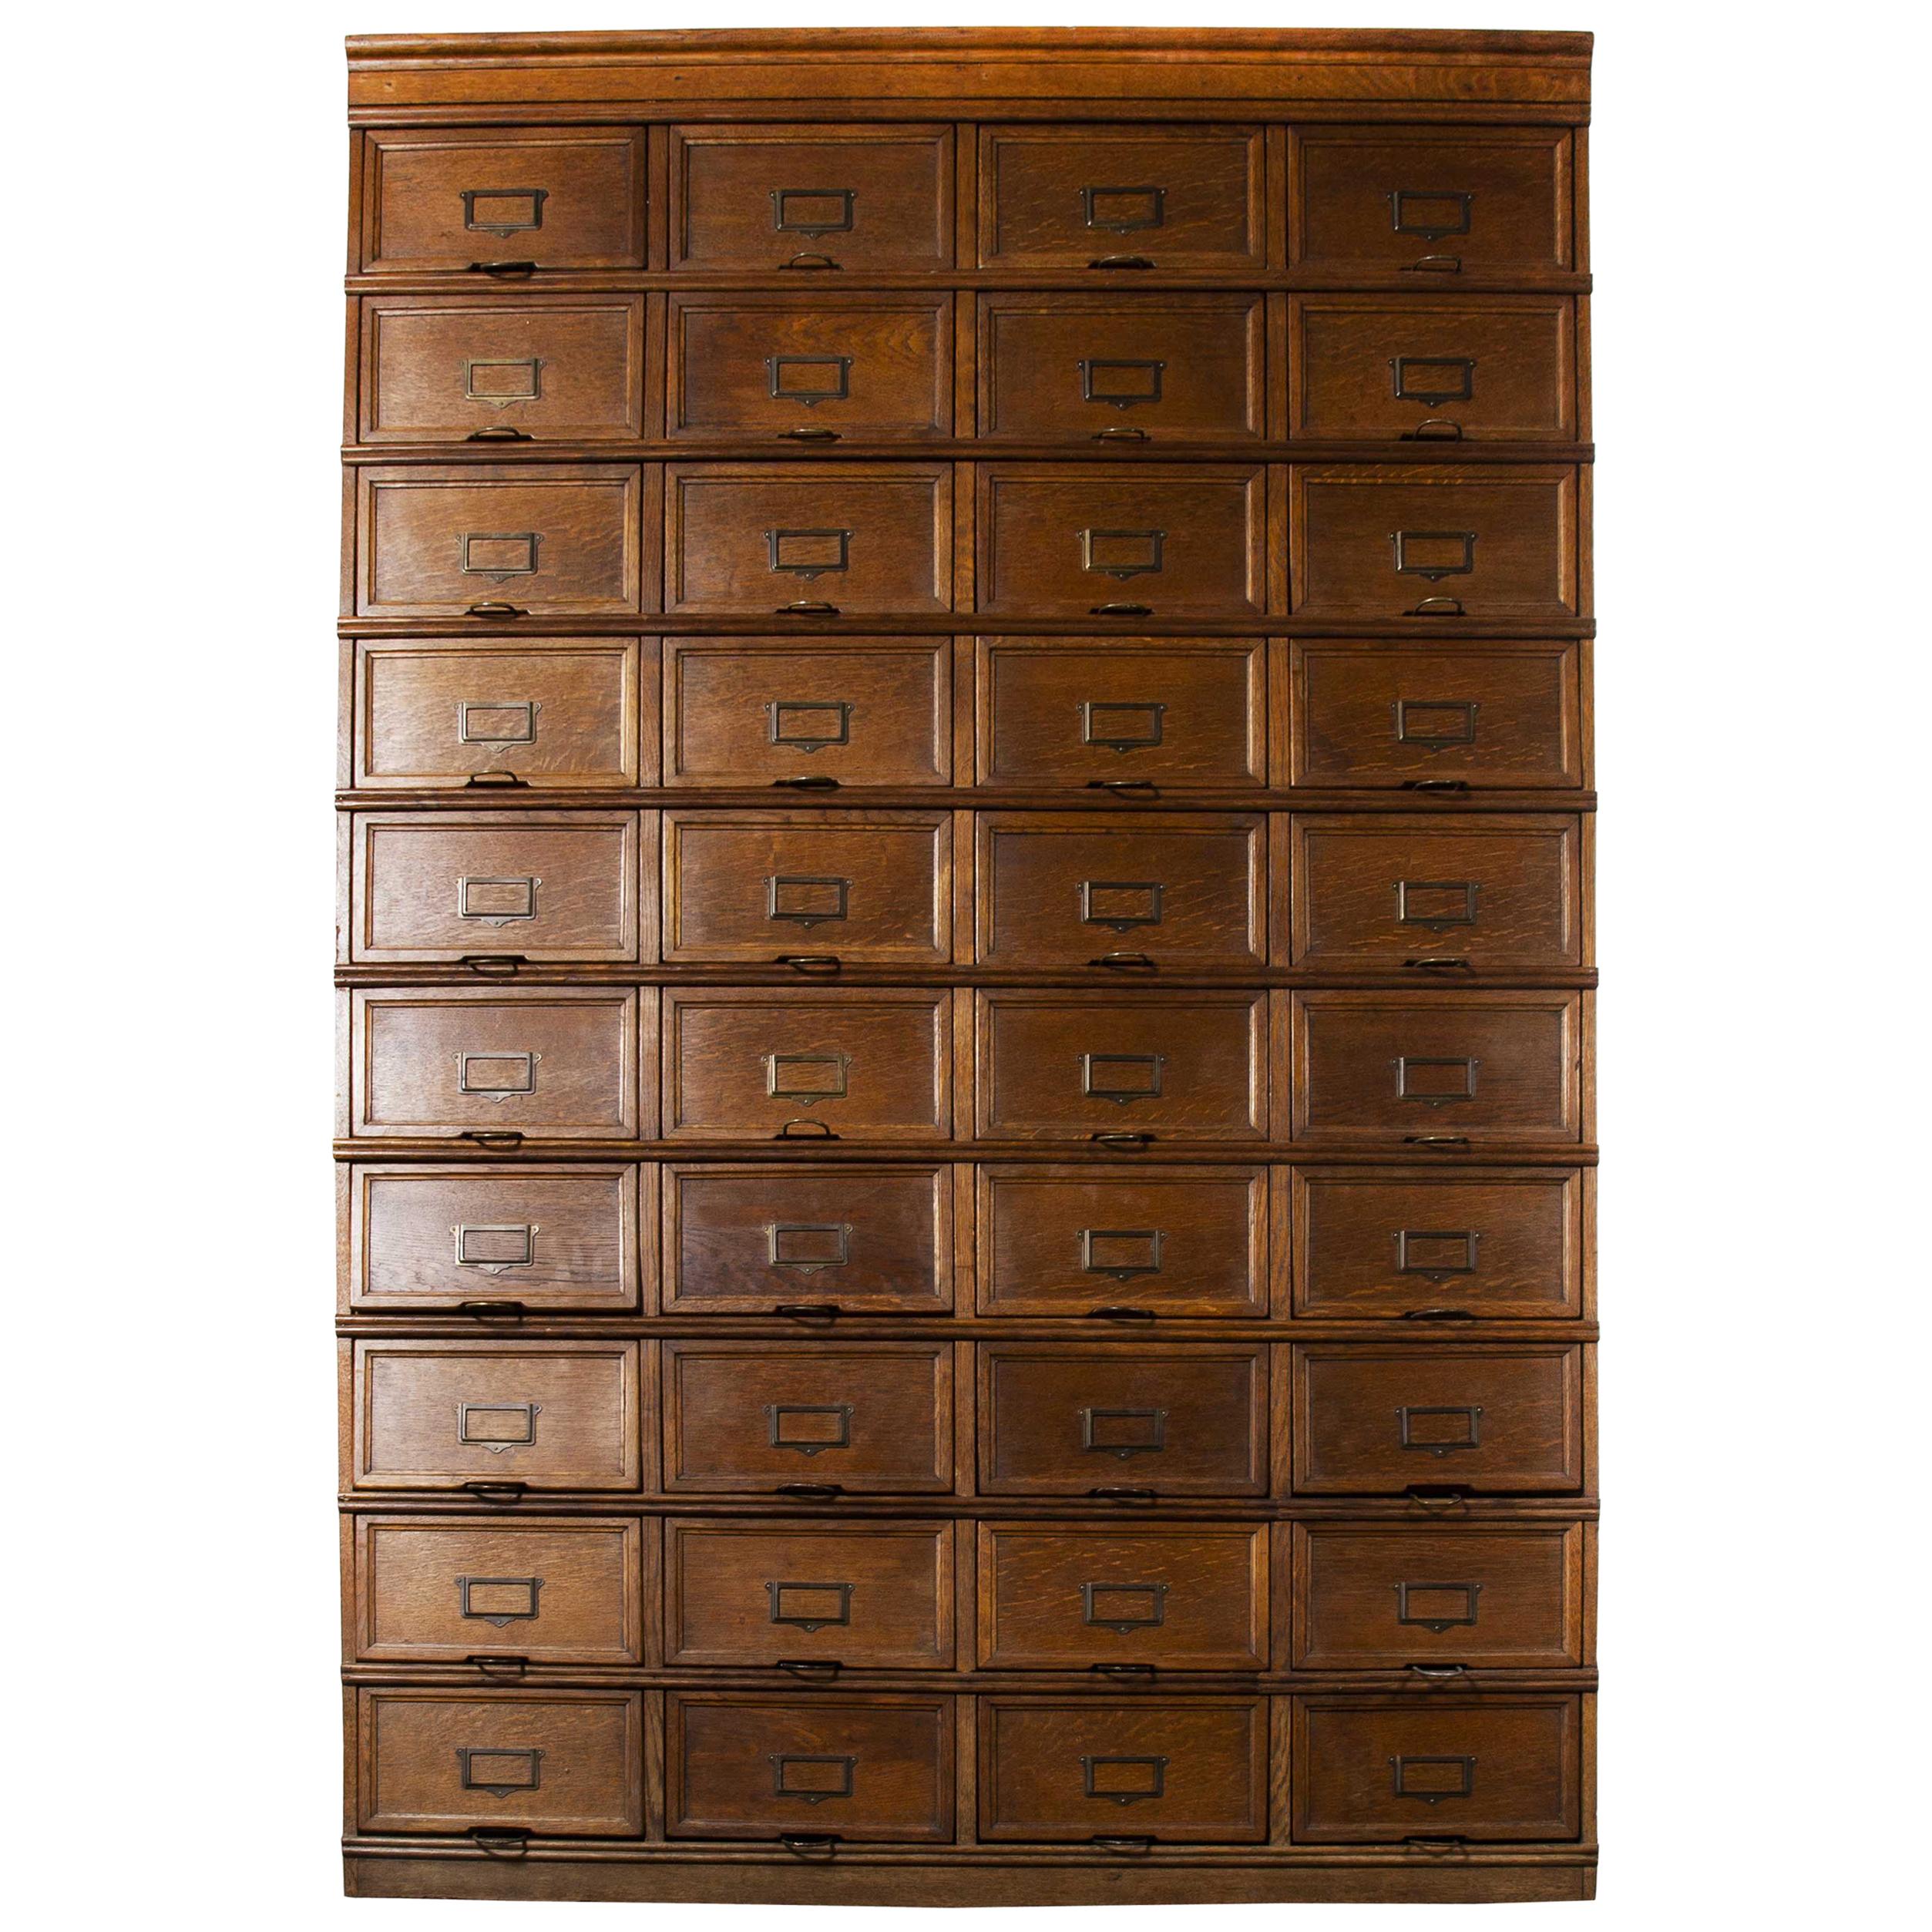 1930s Large Tall Multi Drawer Stolzenberg Atelier Cabinet, Forty Drawers